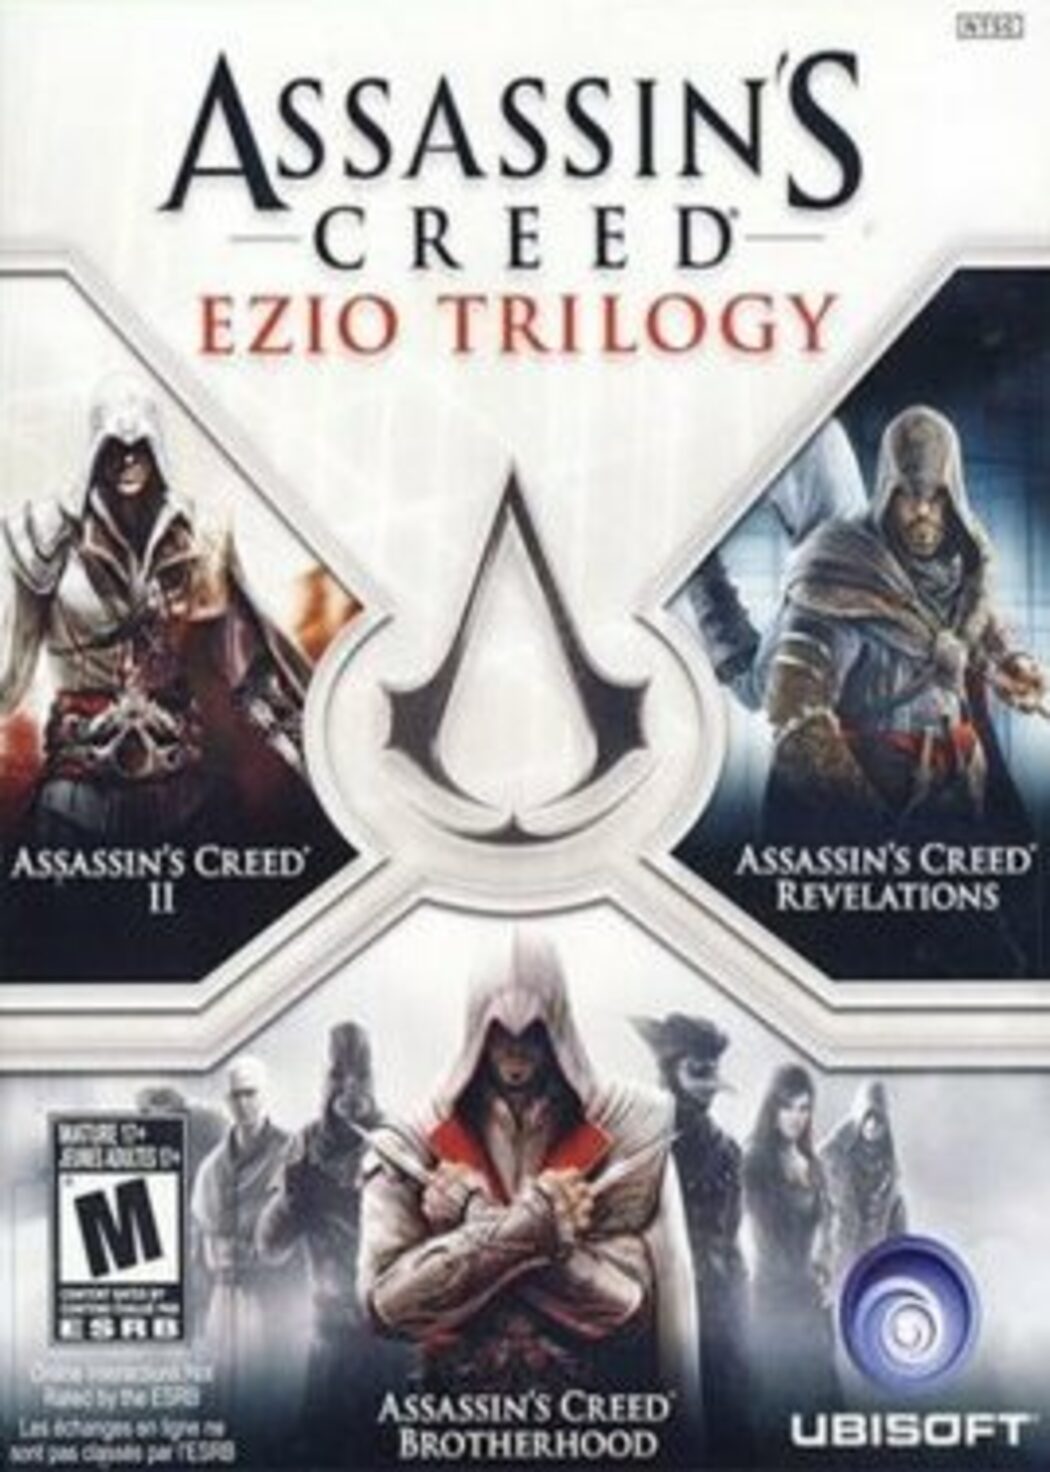 Buy Assassin's Creed Steam Key EUROPE - Cheap - !